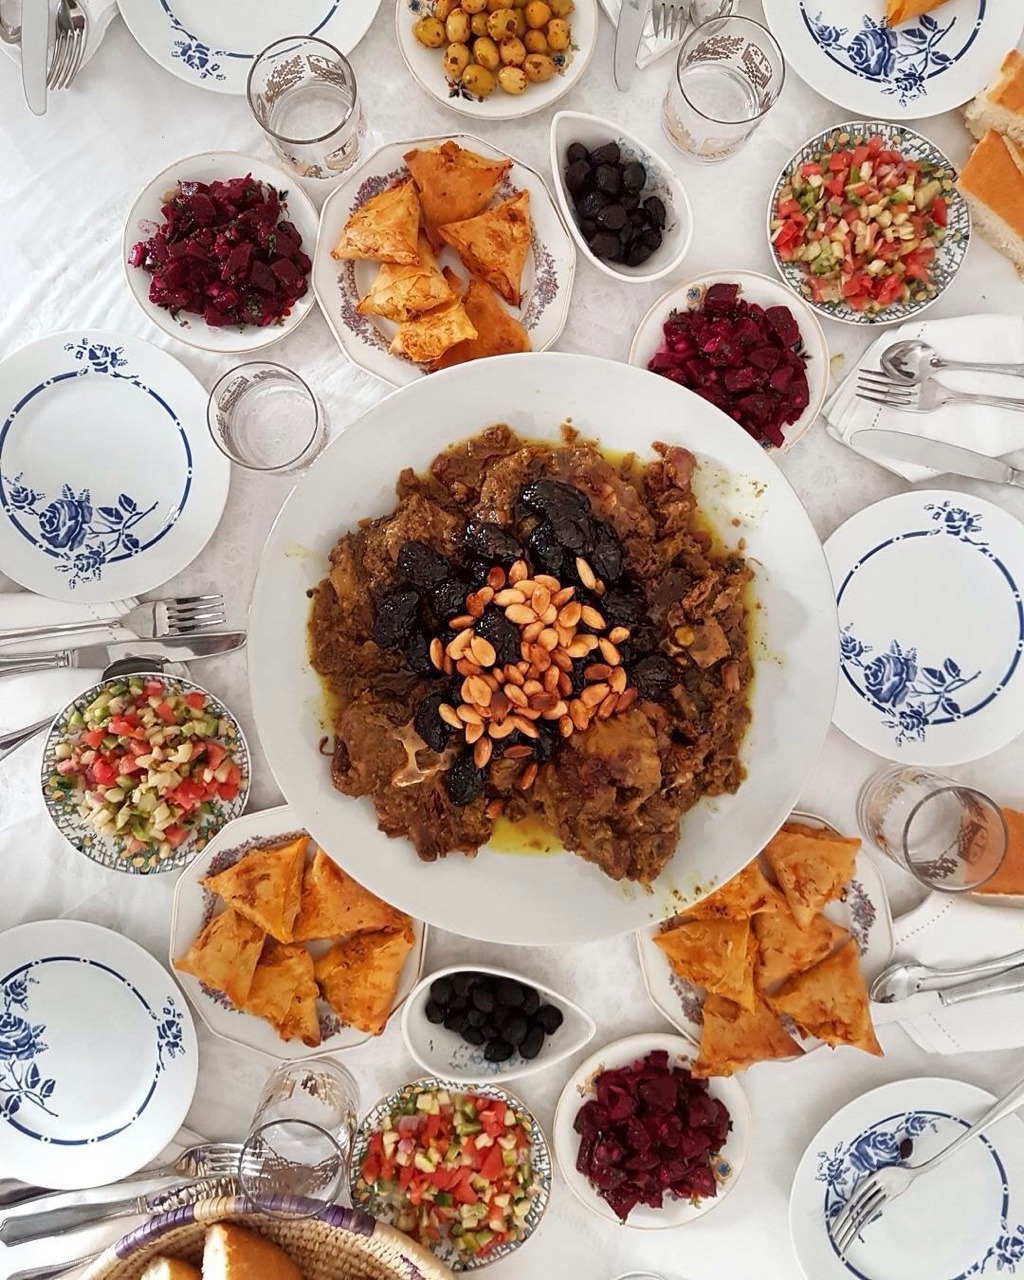 12 traditional Eid al-Fitr dishes from across the globe 